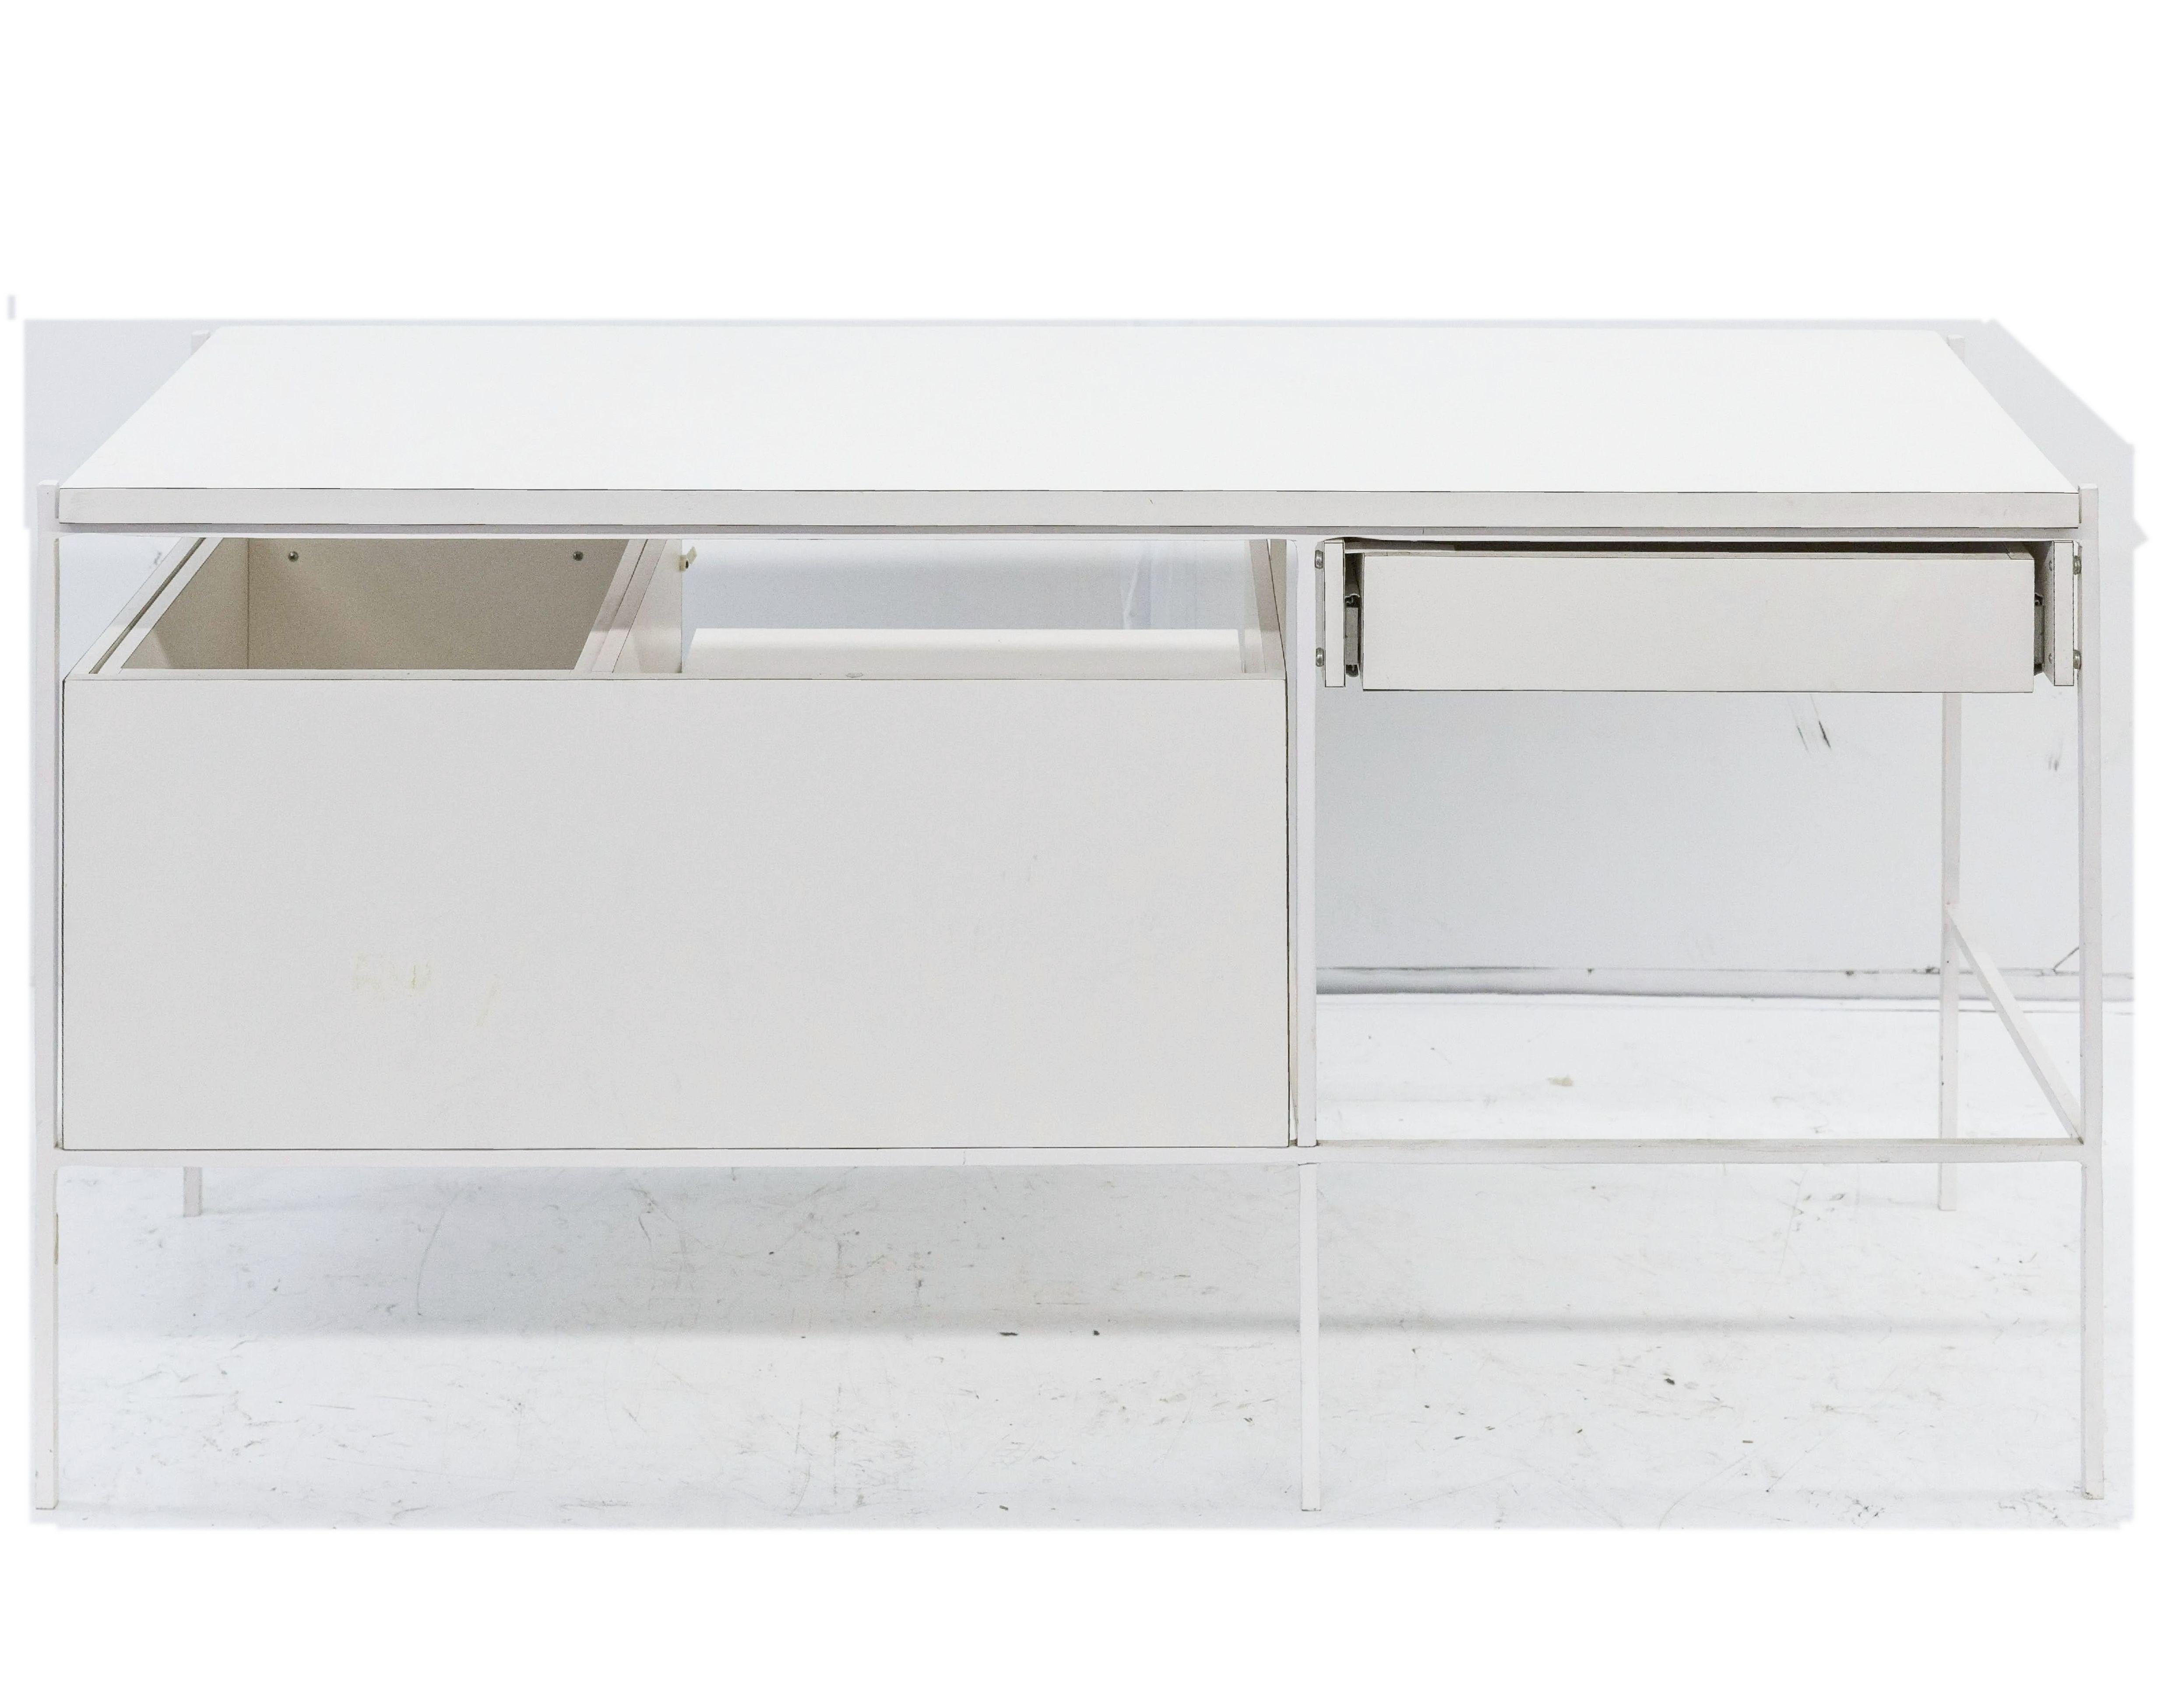 Ladislav Rado white enameled steel modern desk, Vanity, 1955, Knoll and Drake.

Knoll and Drake produced a signature modern line of furniture for a few short years which had enameled square painted tube for its structural elements and was designed